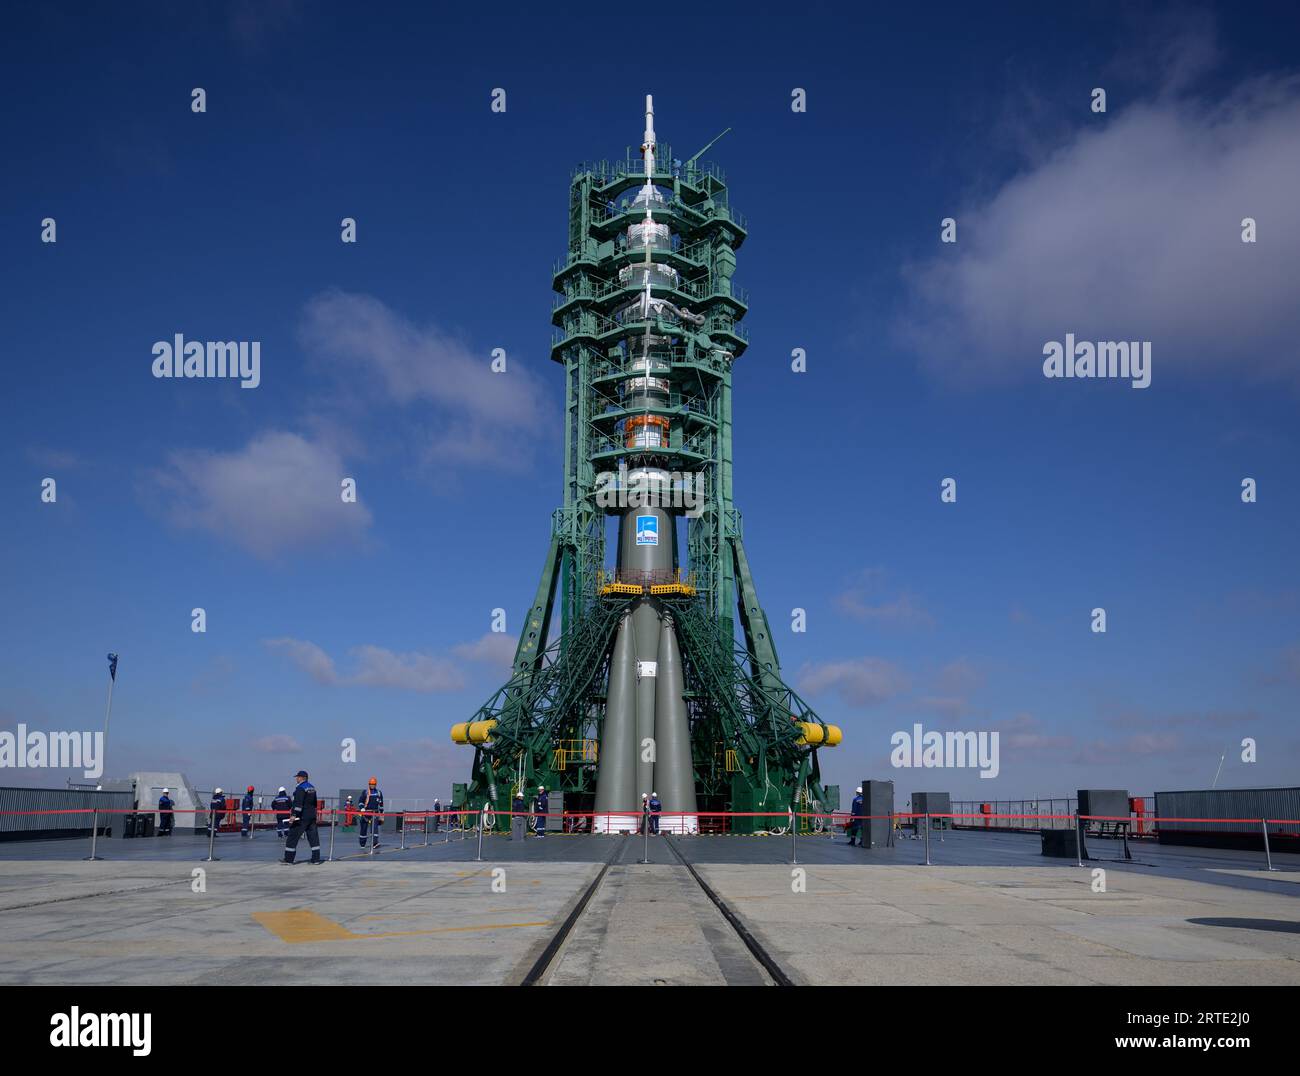 Baikonur, Kazakhstan. 12th Sep, 2023. The Russian Soyuz MS-24 spacecraft and booster rocket is positioned upright with the gantry secured following the roll-out to launch pad 31 at the Baikonur Cosmodrome, September 12, 2023 in Baikonur, Kazakhstan. International Space Station Expedition 70 crew members astronaut Loral O'Hara of NASA, and cosmonauts Oleg Kononenko, and Nikolai Chub of Roscosmos are set to launch September 15th to the orbiting laboratory. Credit: Bill Ingalls/NASA/Alamy Live News Stock Photo